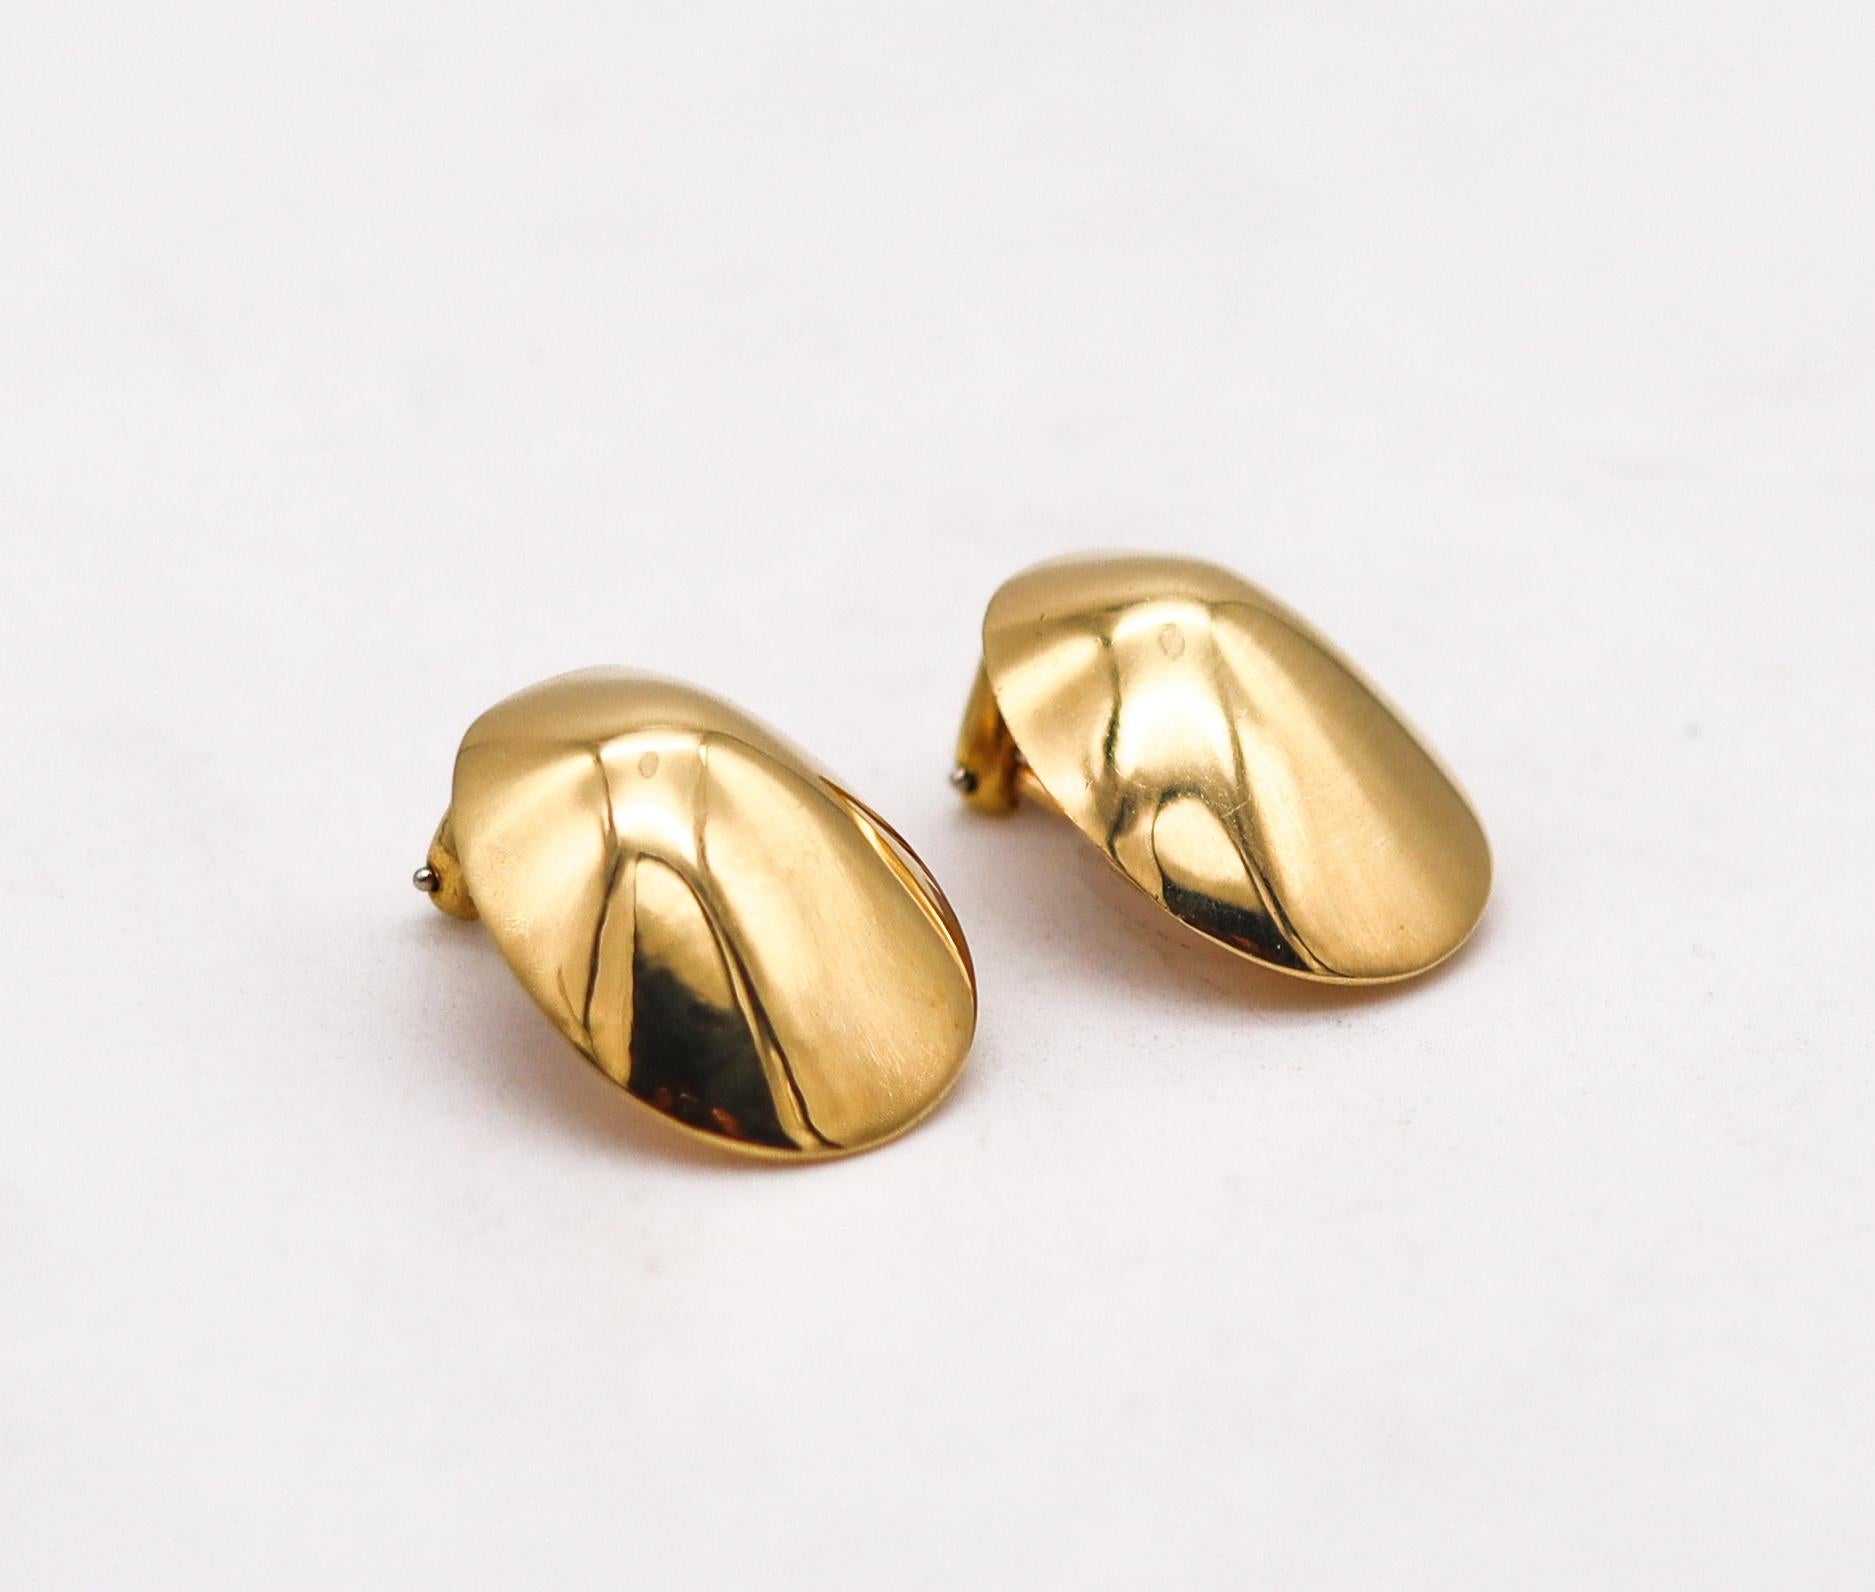 Convex oval earrings designed by Angela Cummings for Tiffany & Co.

A rare three dimensional pieces, created by Cummings at the Tiffany Studios, back in the late 1970's. These clips on earrings has been crafted in an oval convex shape in solid